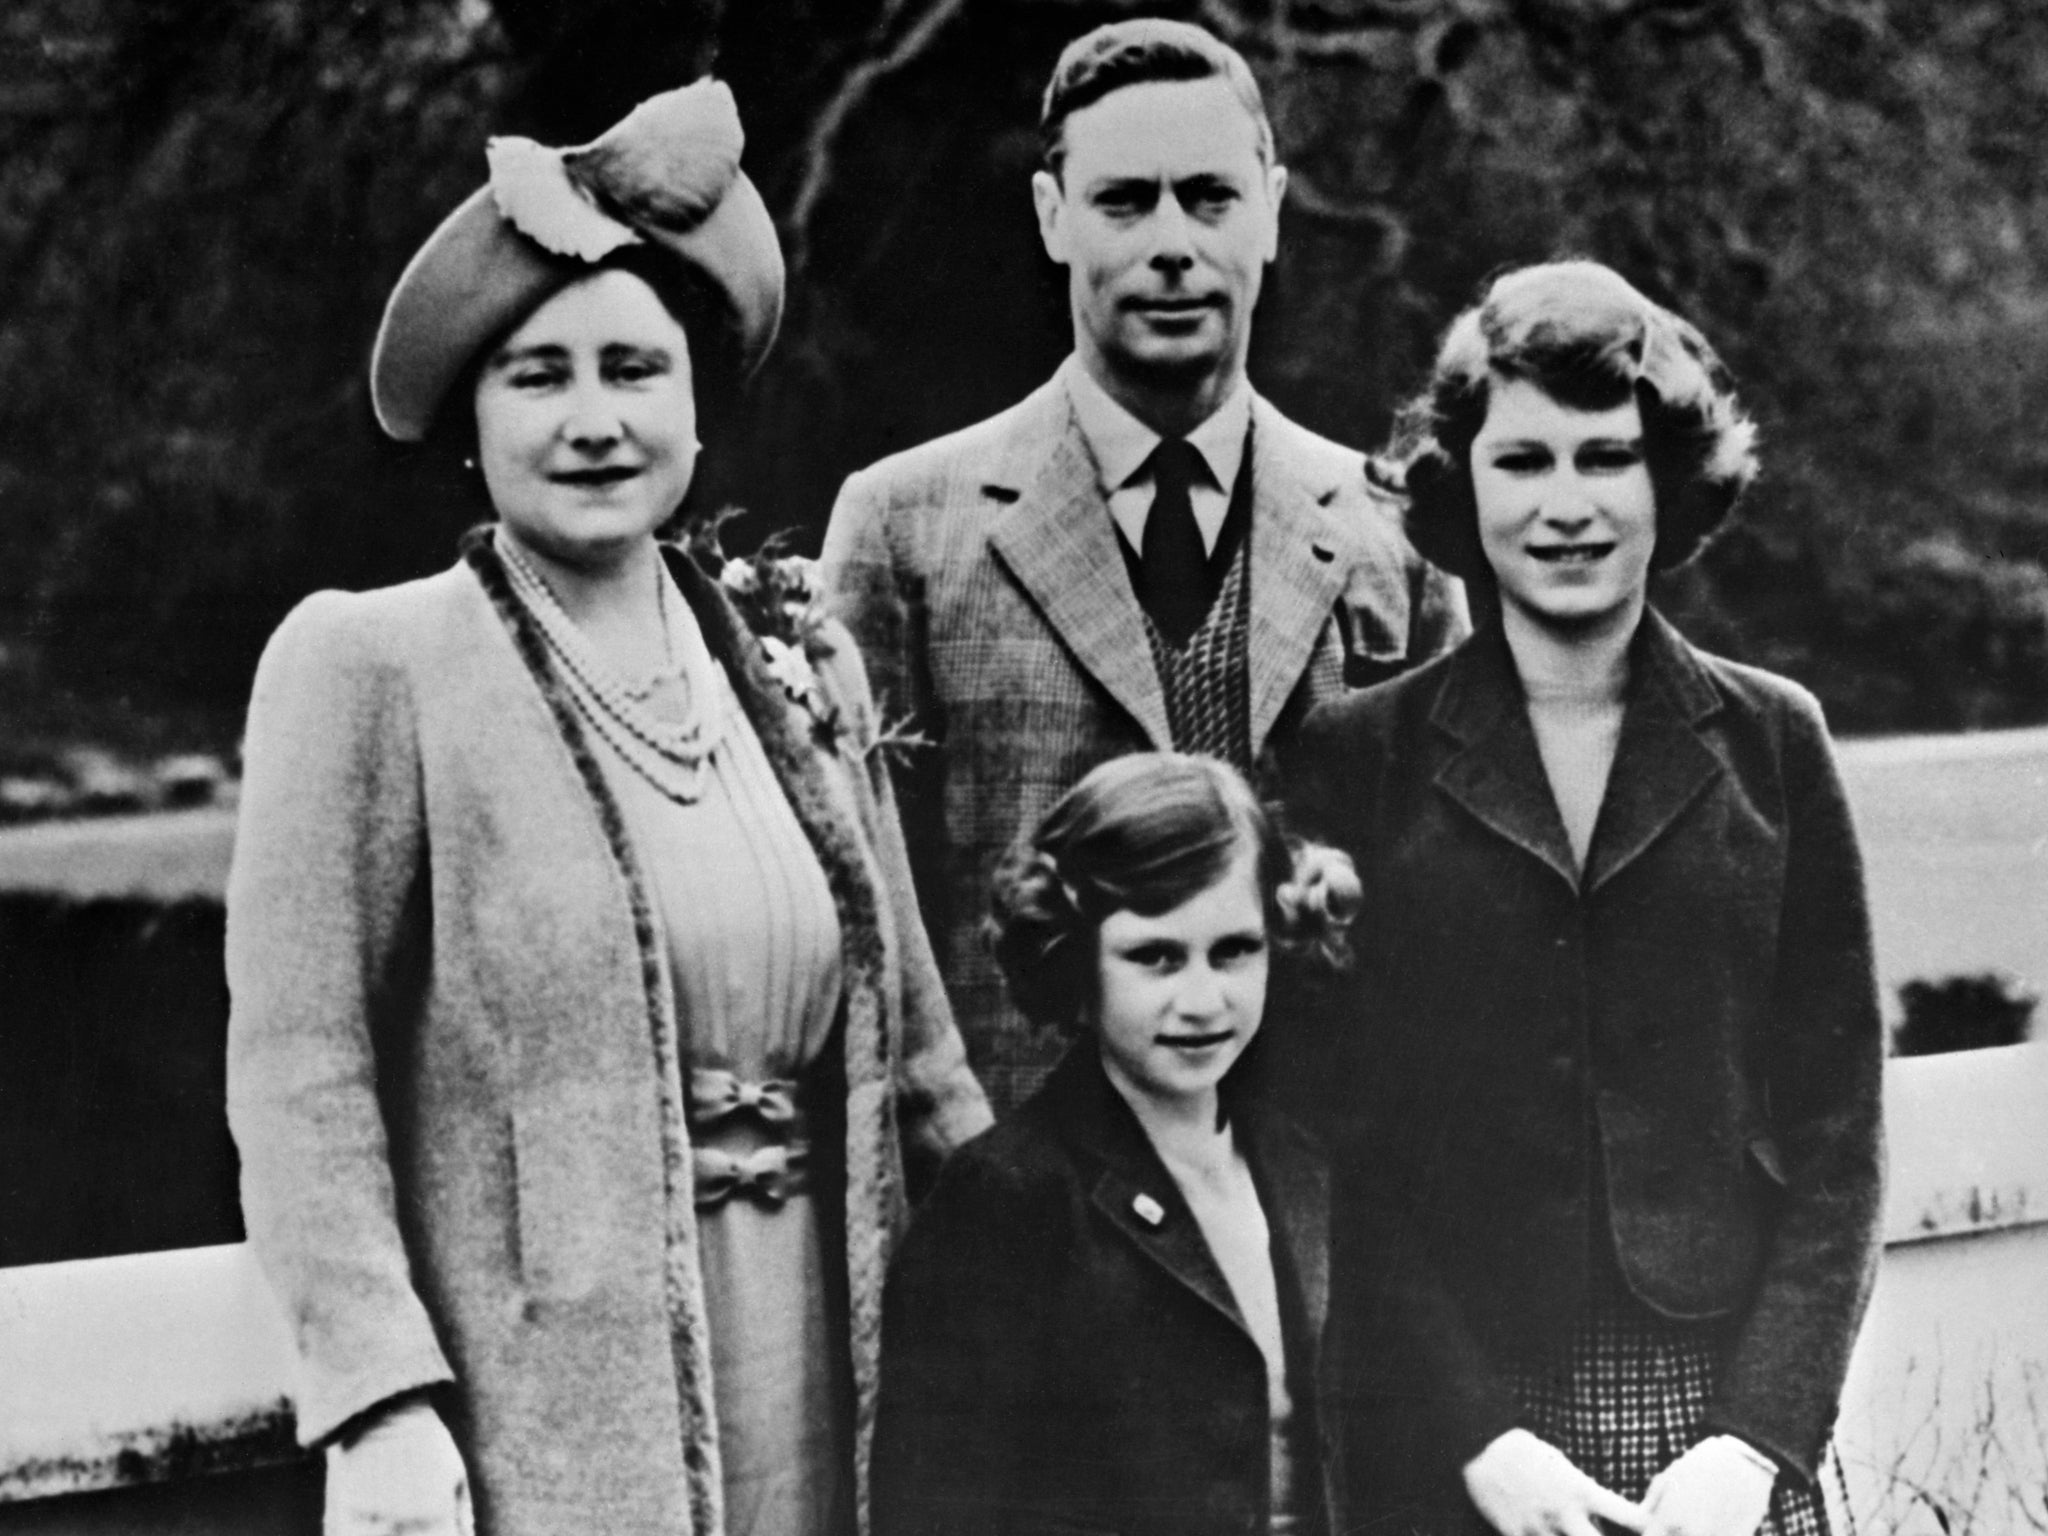 The Queen (right) with her mother, Queen Elizabeth, father, King George VI and sister Princess Margaret in 1938